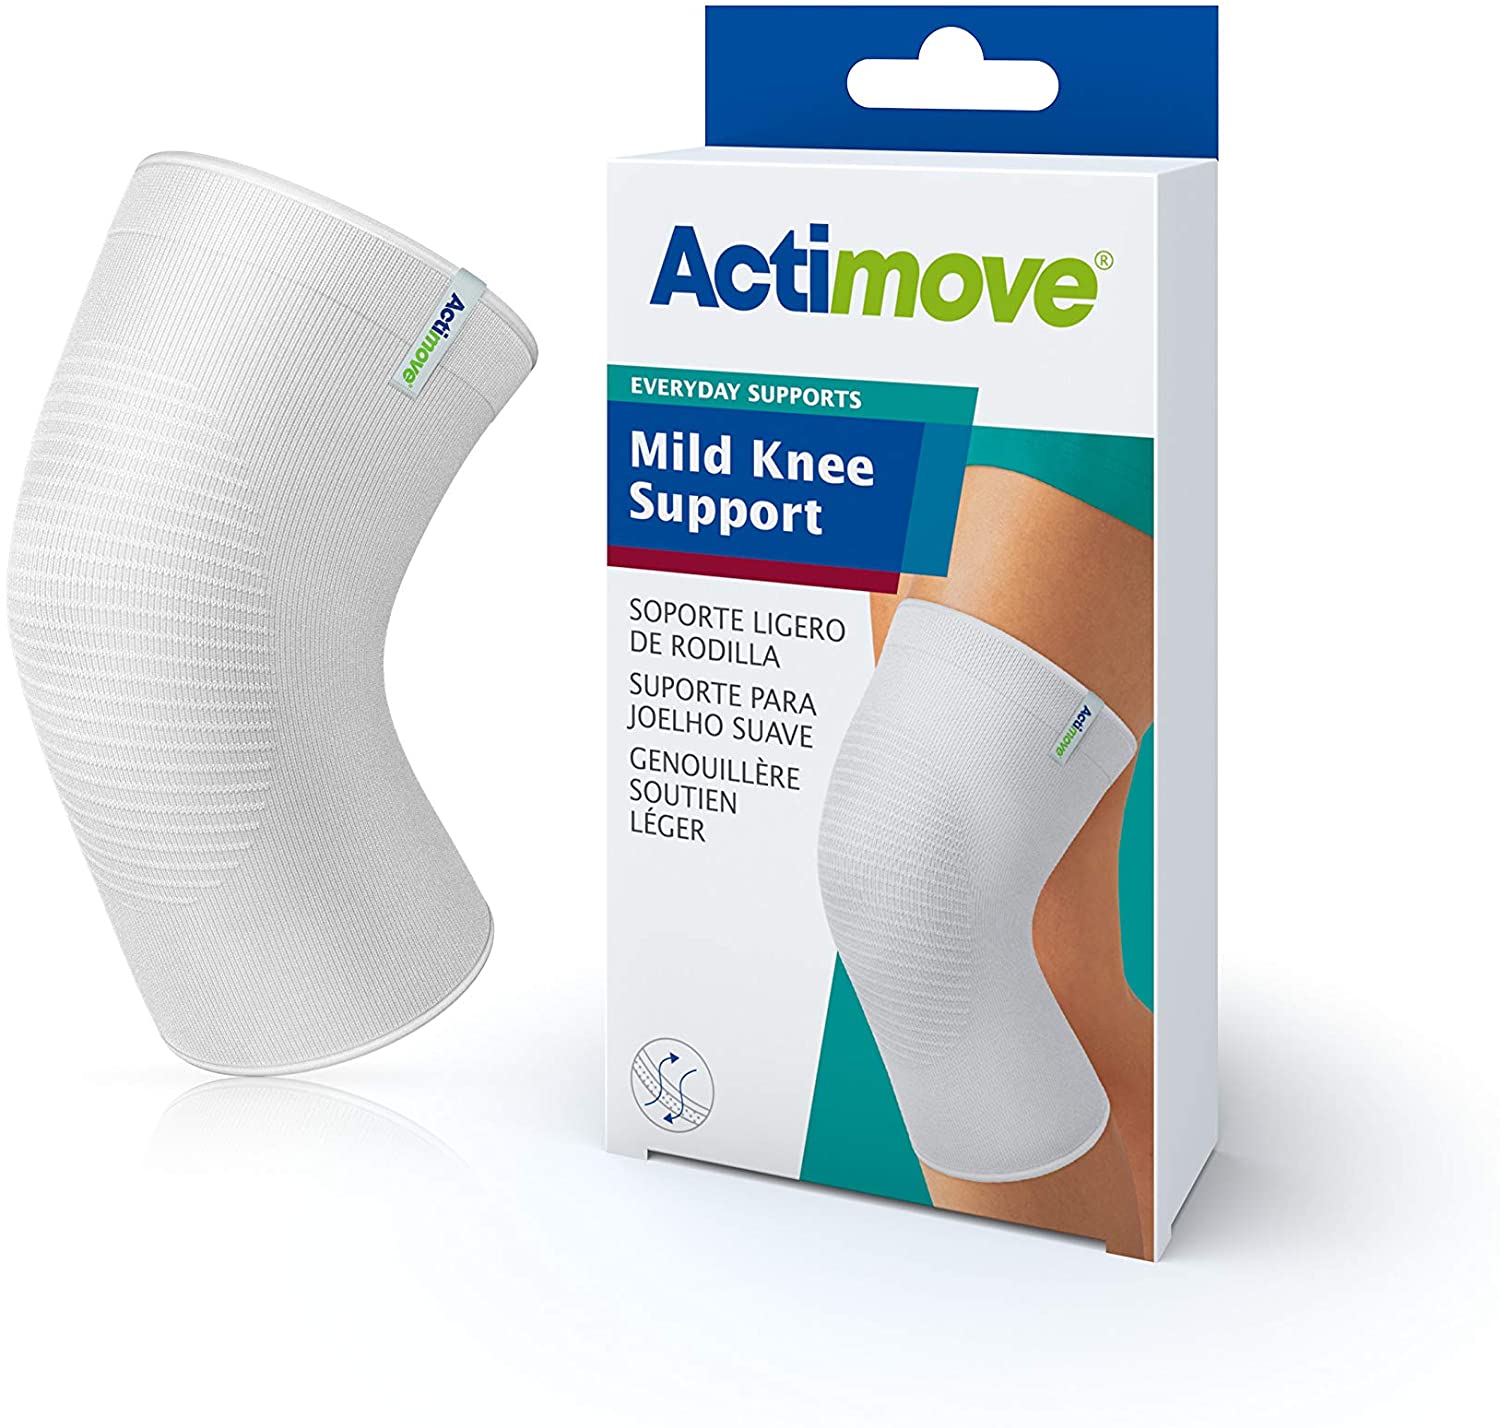 Comfort of an elastic support with the therapeutic properties of heat, ideal for knee sprain or strain, wrap design allows for easy fit.